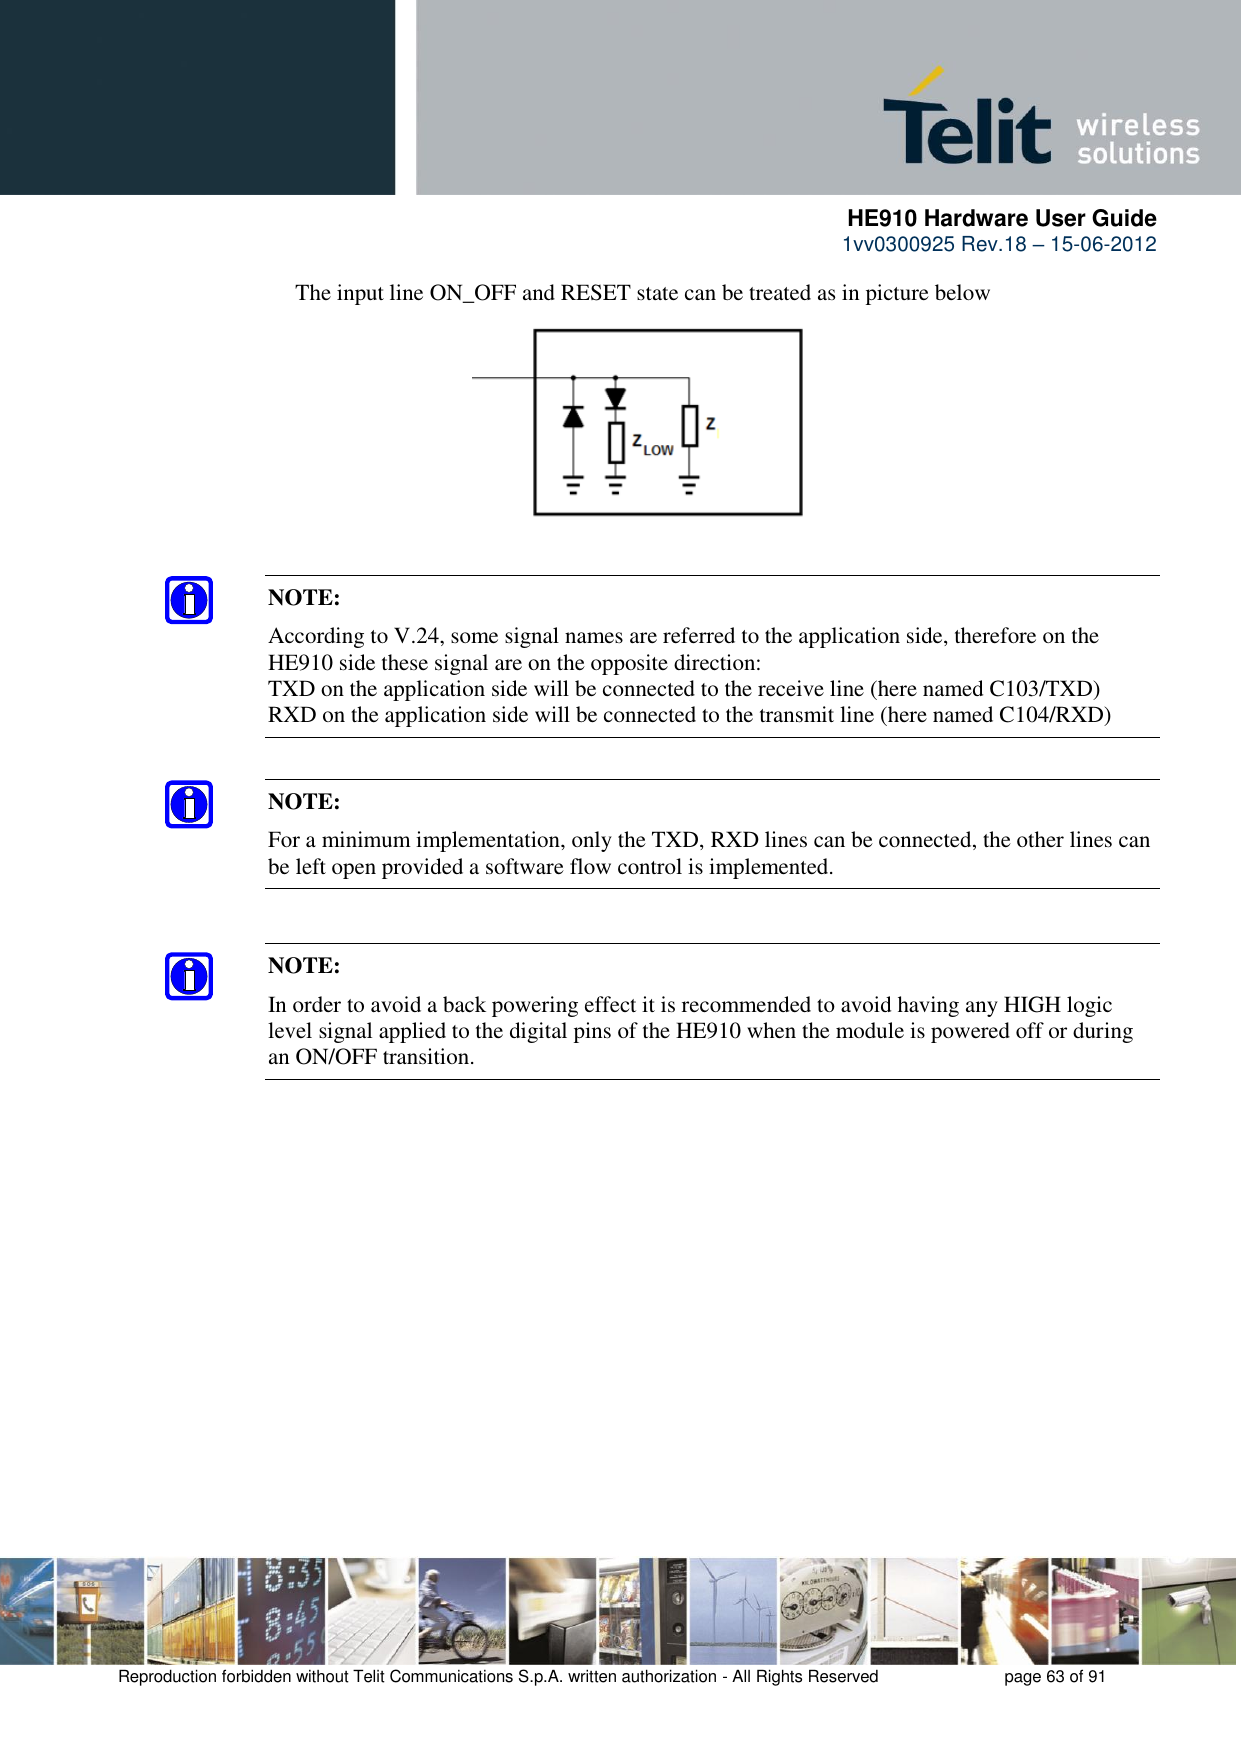      HE910 Hardware User Guide 1vv0300925 Rev.18 – 15-06-2012    Reproduction forbidden without Telit Communications S.p.A. written authorization - All Rights Reserved    page 63 of 91  The input line ON_OFF and RESET state can be treated as in picture below     NOTE: According to V.24, some signal names are referred to the application side, therefore on the HE910 side these signal are on the opposite direction:  TXD on the application side will be connected to the receive line (here named C103/TXD) RXD on the application side will be connected to the transmit line (here named C104/RXD) NOTE: For a minimum implementation, only the TXD, RXD lines can be connected, the other lines can be left open provided a software flow control is implemented. NOTE: In order to avoid a back powering effect it is recommended to avoid having any HIGH logic level signal applied to the digital pins of the HE910 when the module is powered off or during an ON/OFF transition. 